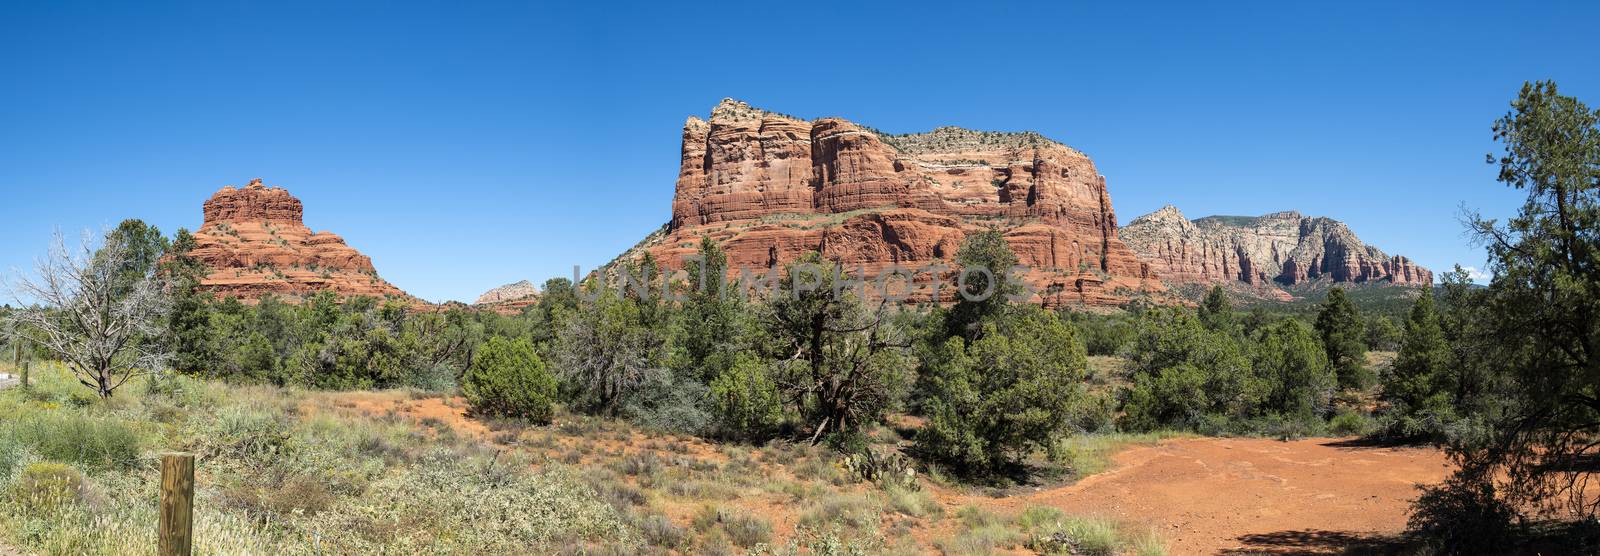 Panorama view of Bell Rock and Courthouse Butte from Red Rock Sc by Njean